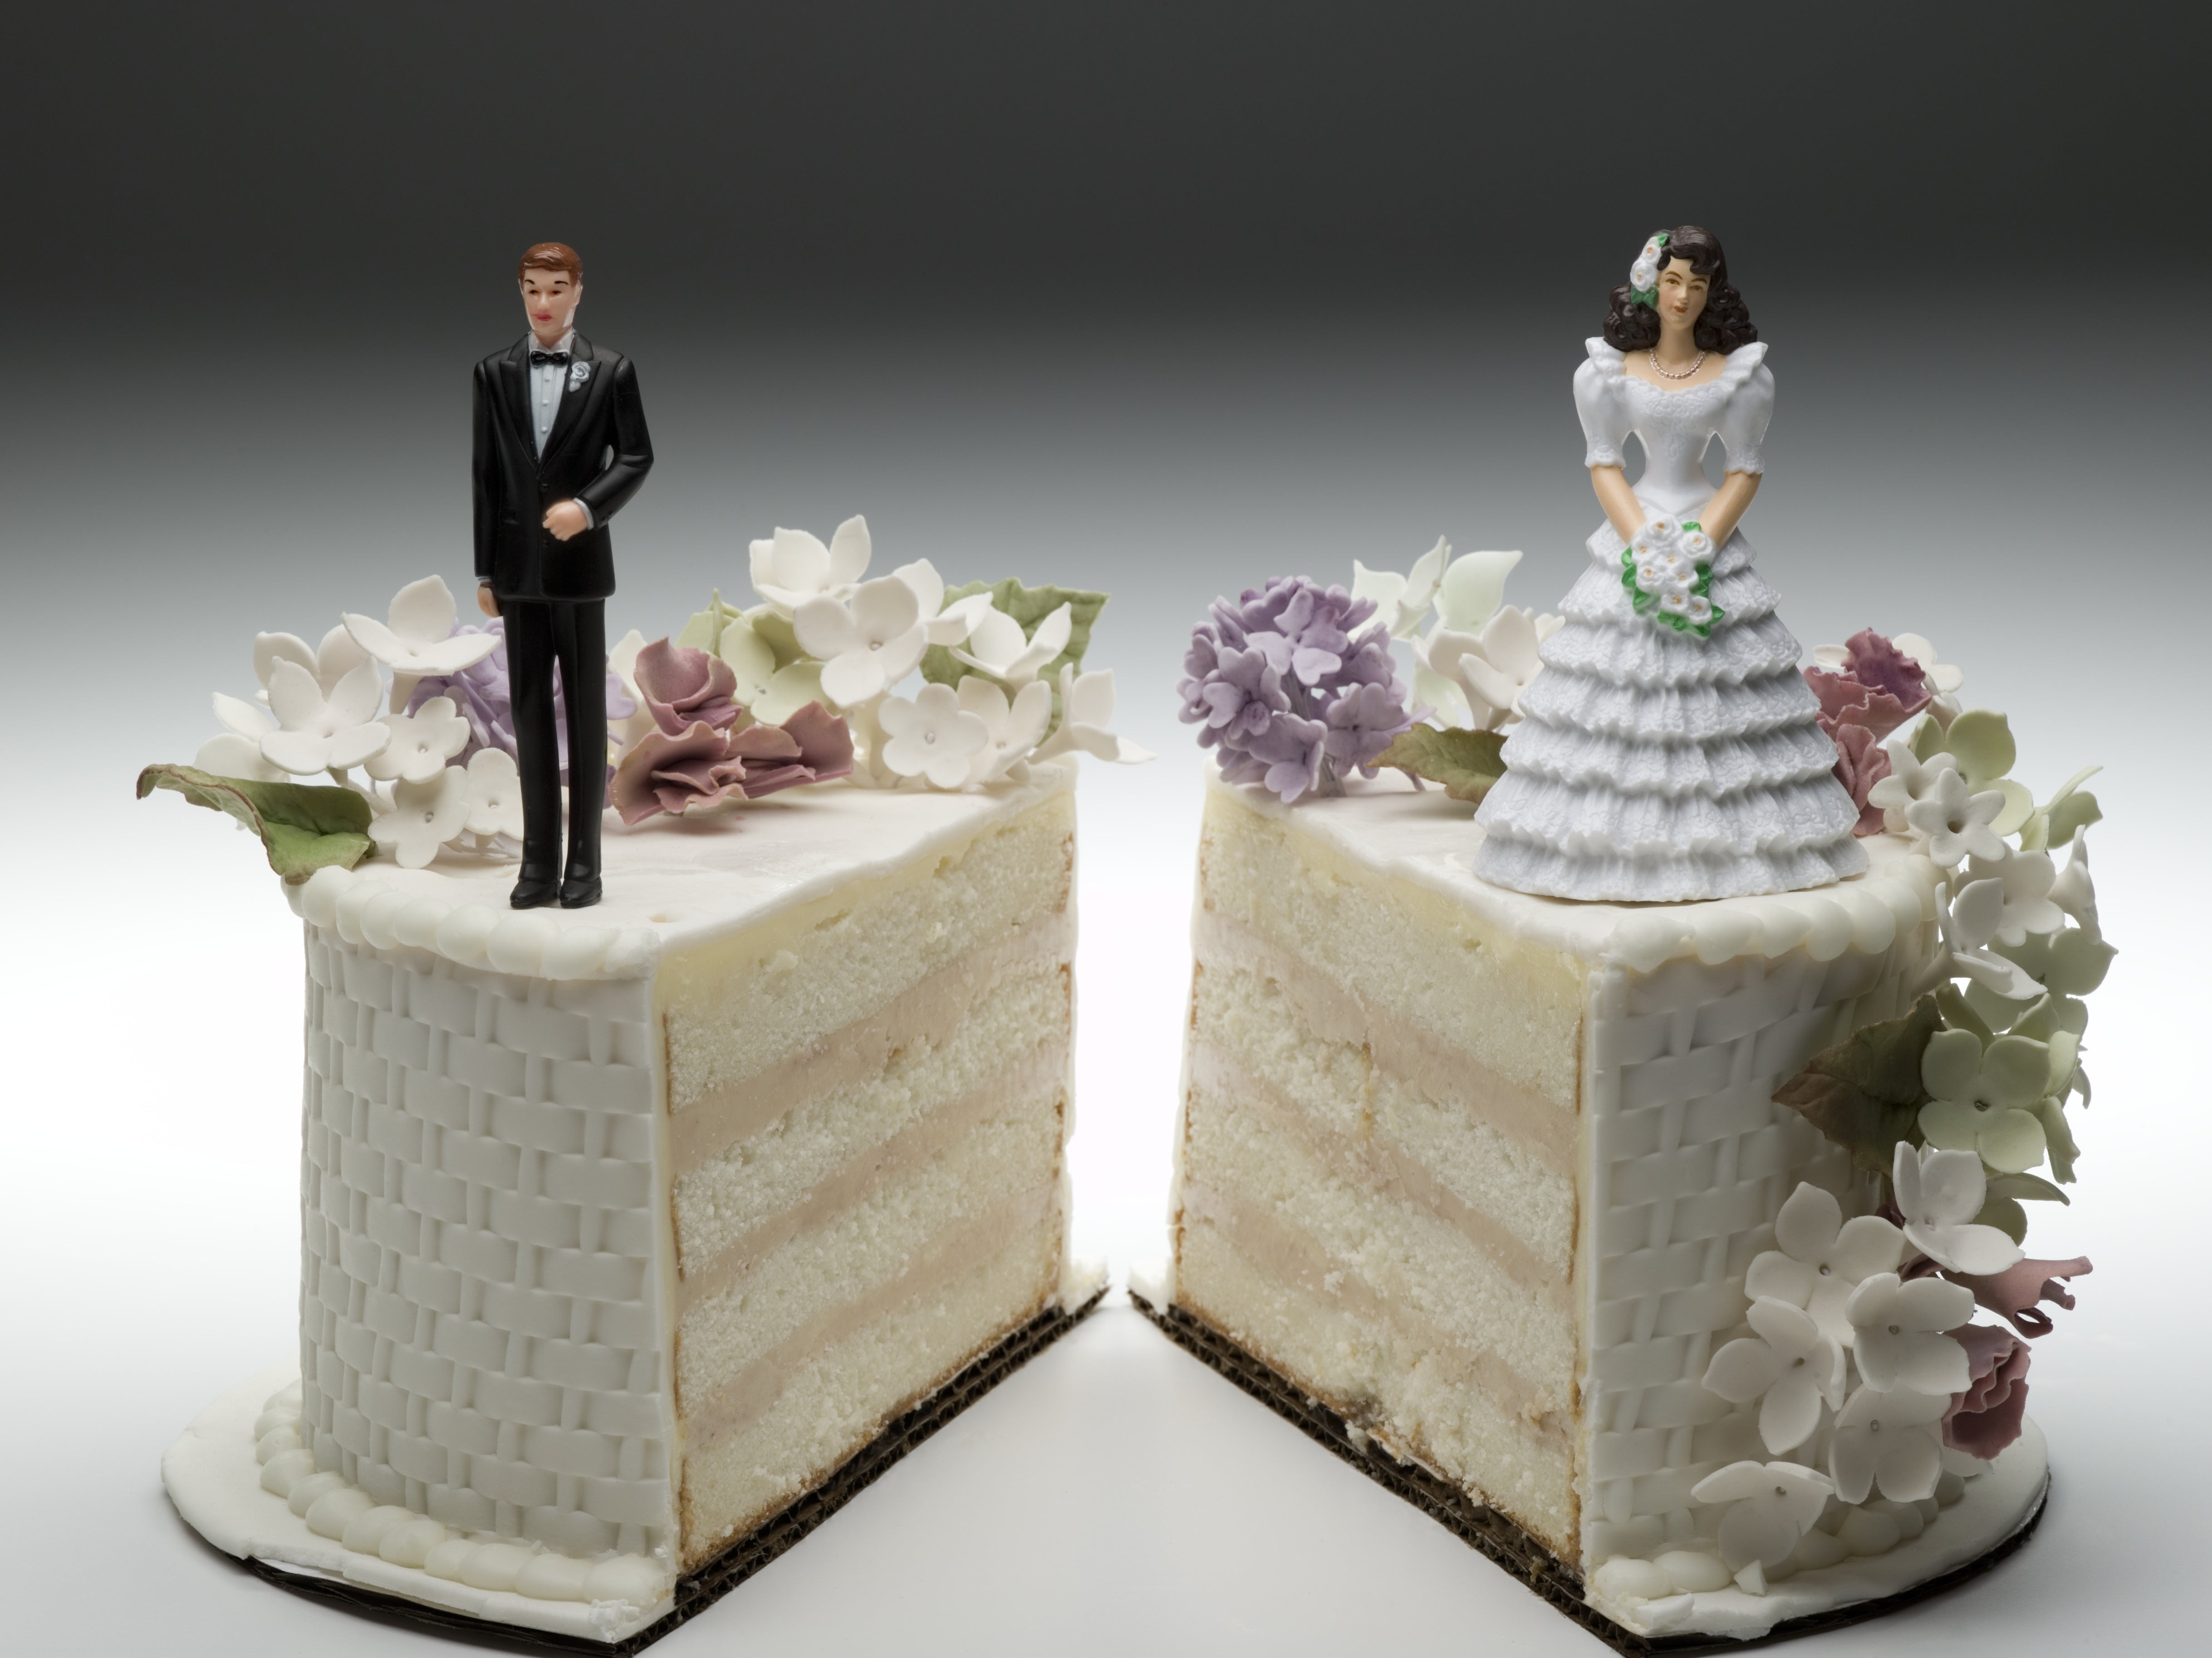 No Fault Divorce explained from the author of Breaking Law!